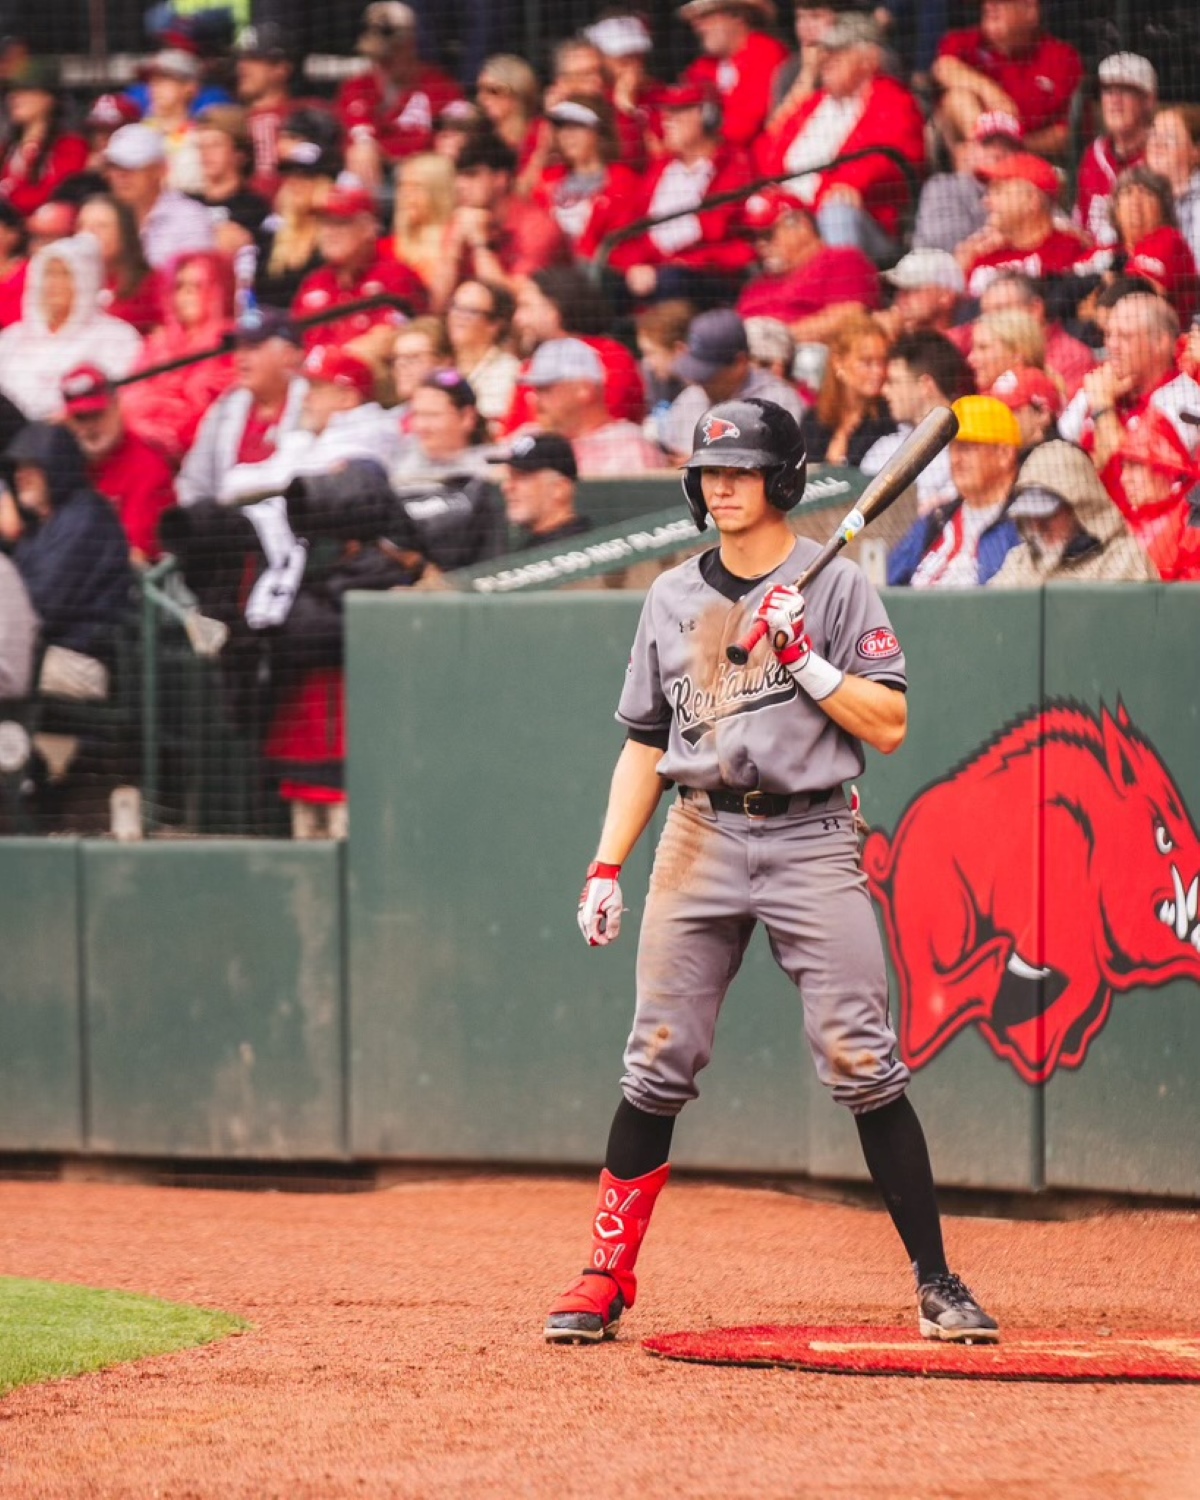 Brooks Kettering, wearing a Southeast Missouri State University baseball uniform, stands in the on-deck circle during a game at Baum-Walker Stadium in Fayetteville, Arkansas.